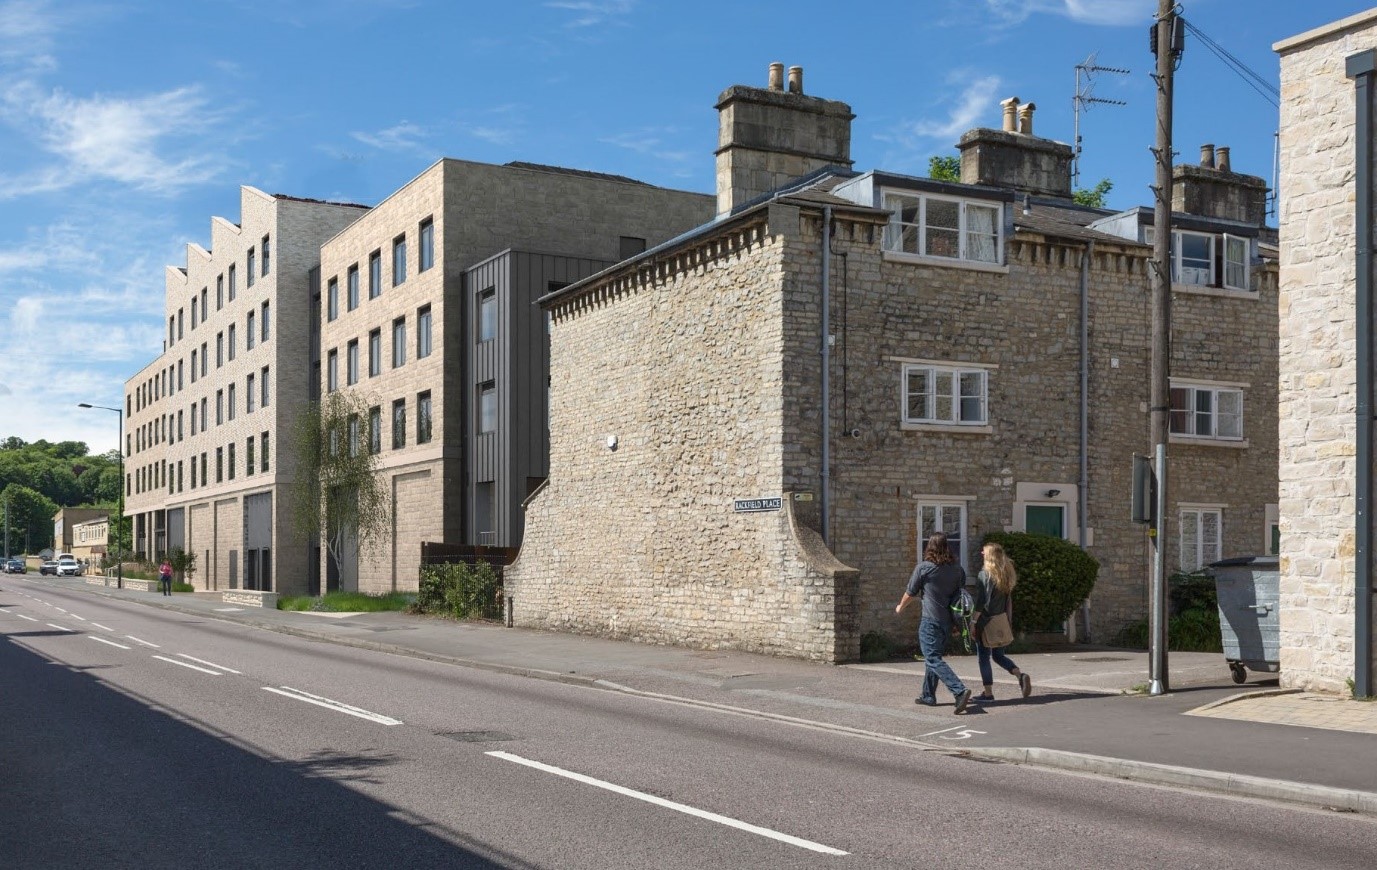 Real has commenced work on the Hollis Building in Bath